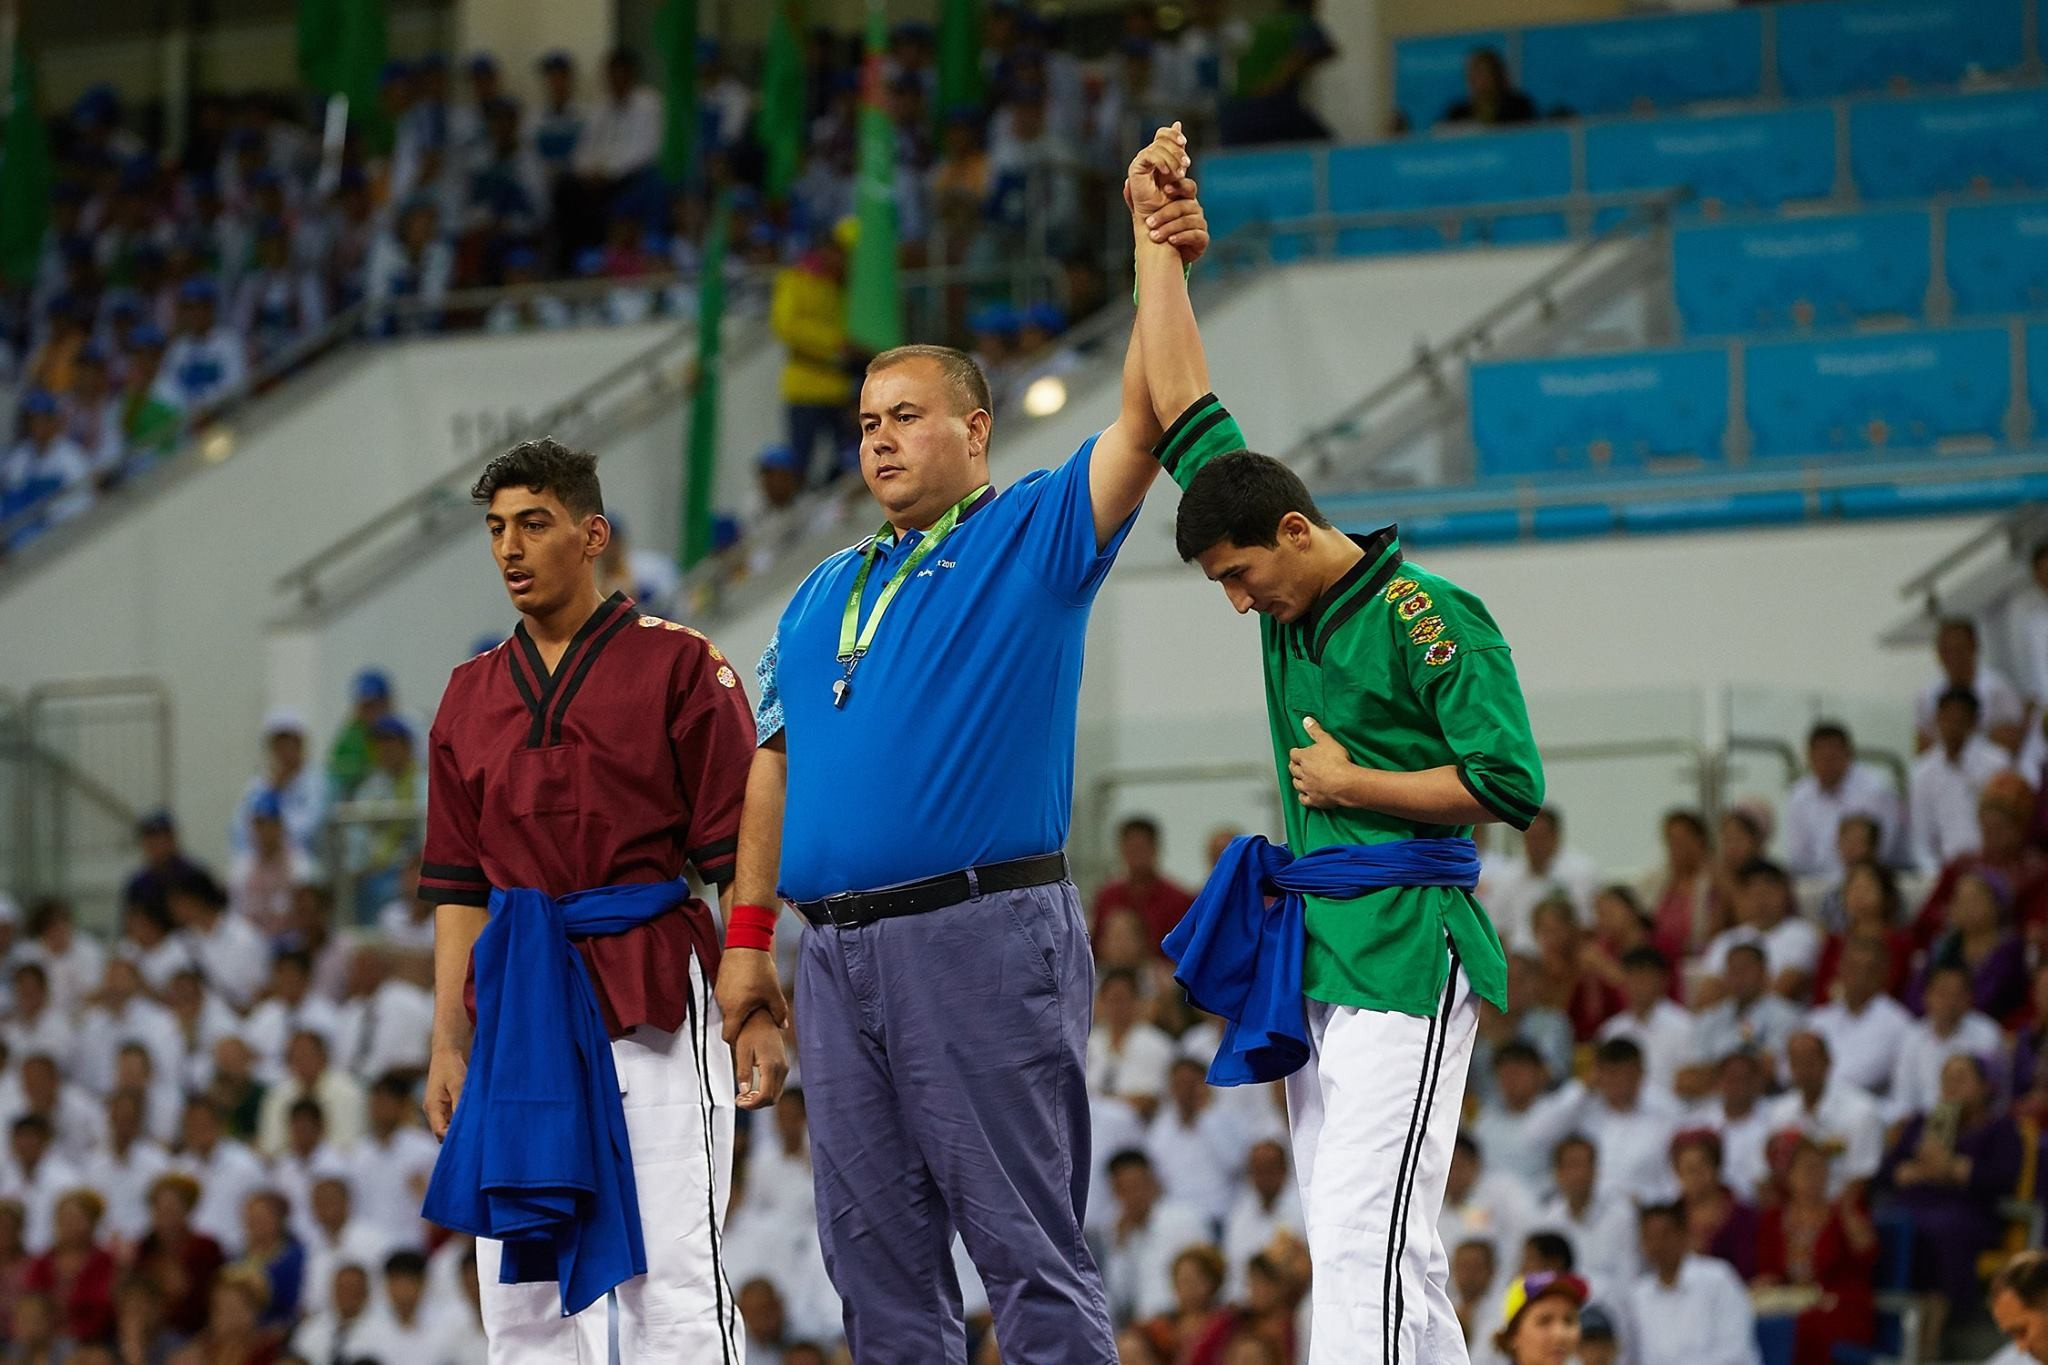 Hosts claim 10 gold medals on first day of Ashgabat 2017 traditional wrestling action